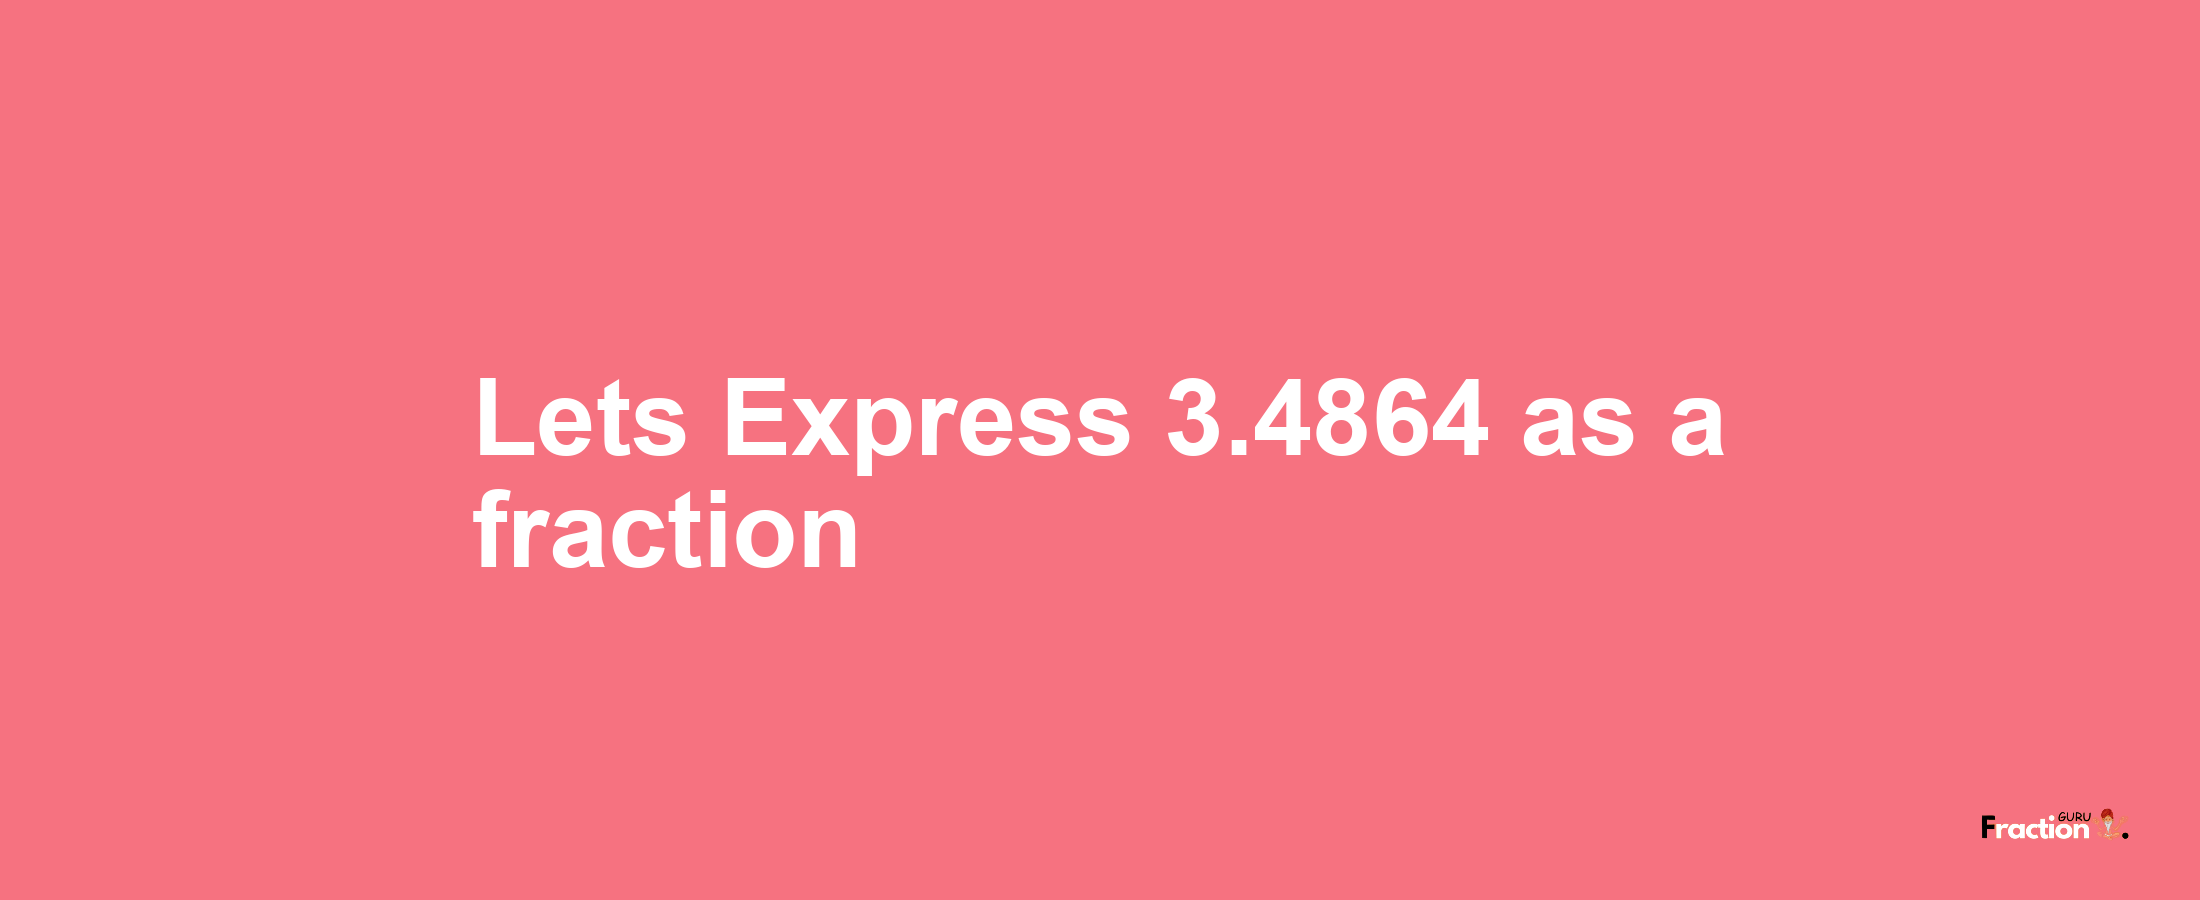 Lets Express 3.4864 as afraction